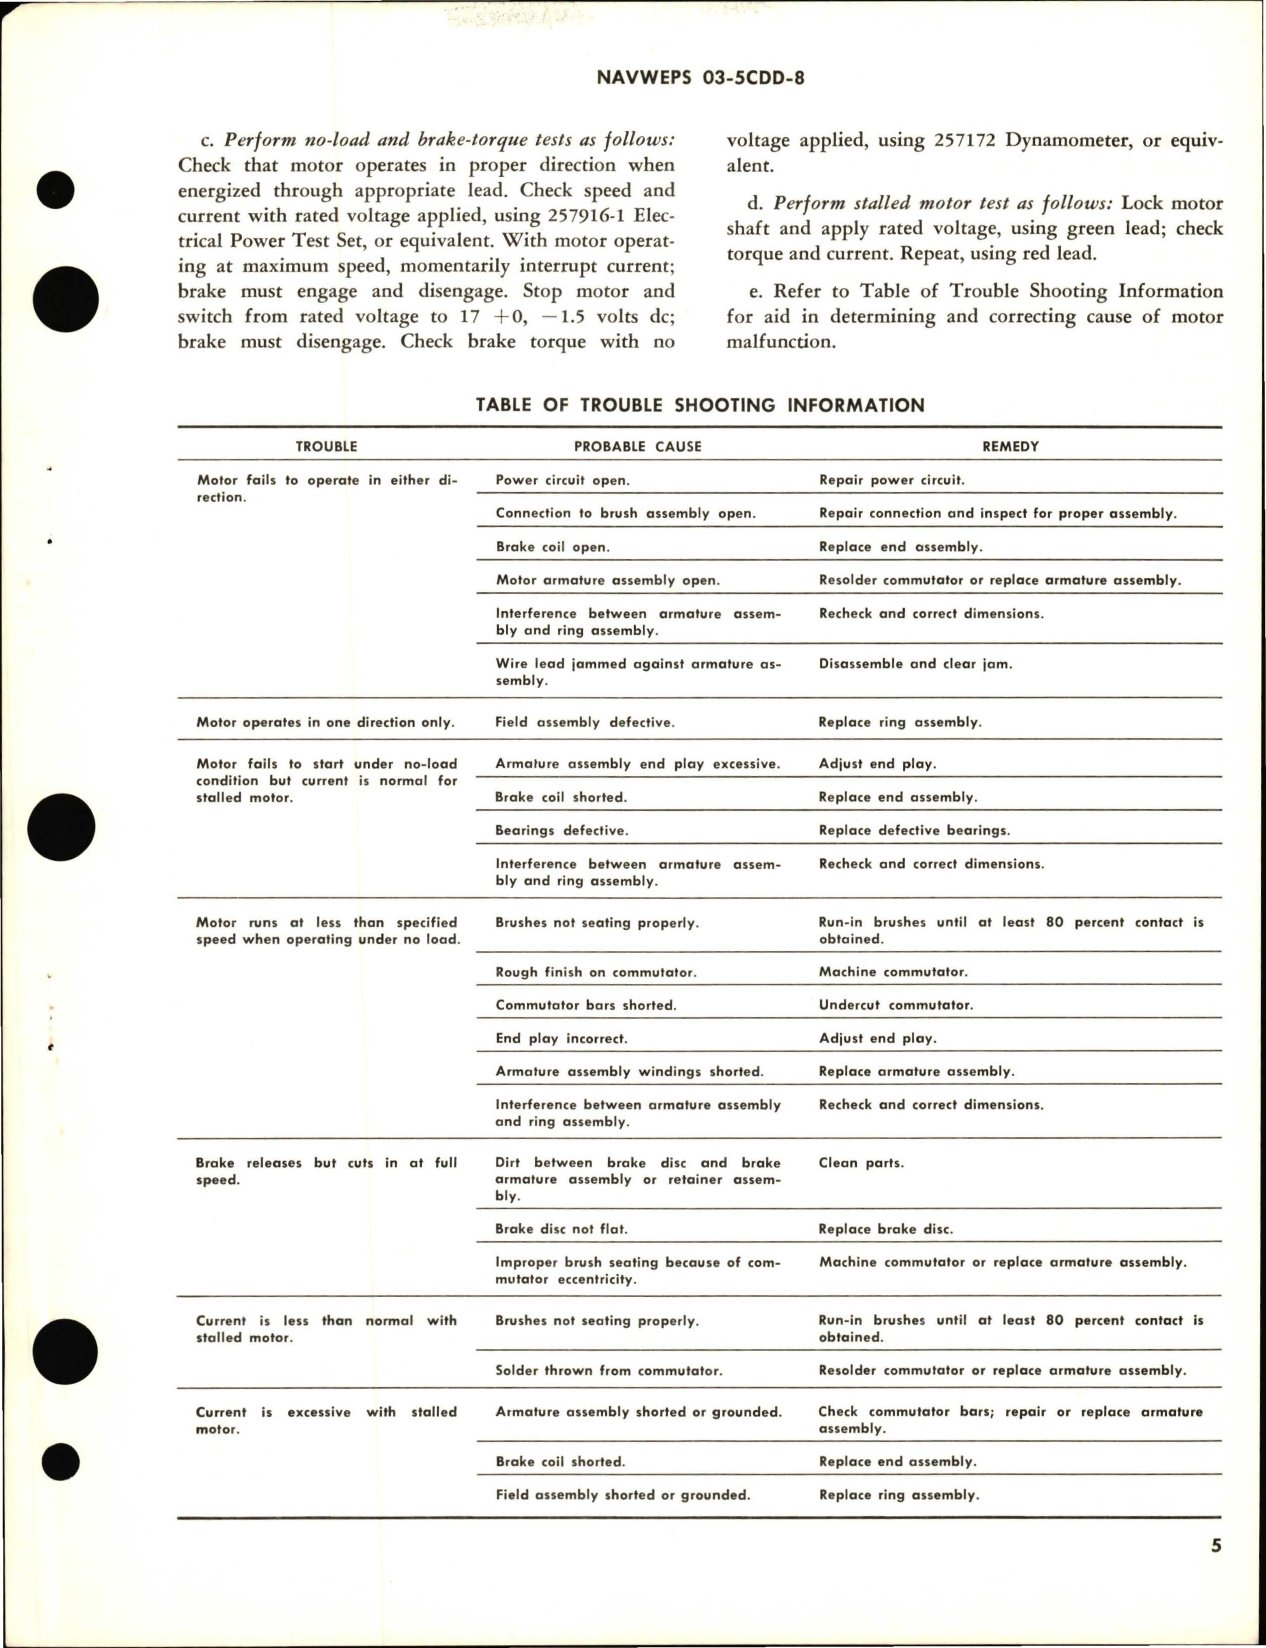 Sample page 5 from AirCorps Library document: Overhaul Instructions with Parts Breakdown for Aircraft Direct-Current Motors - Part 36843 and 36843-1